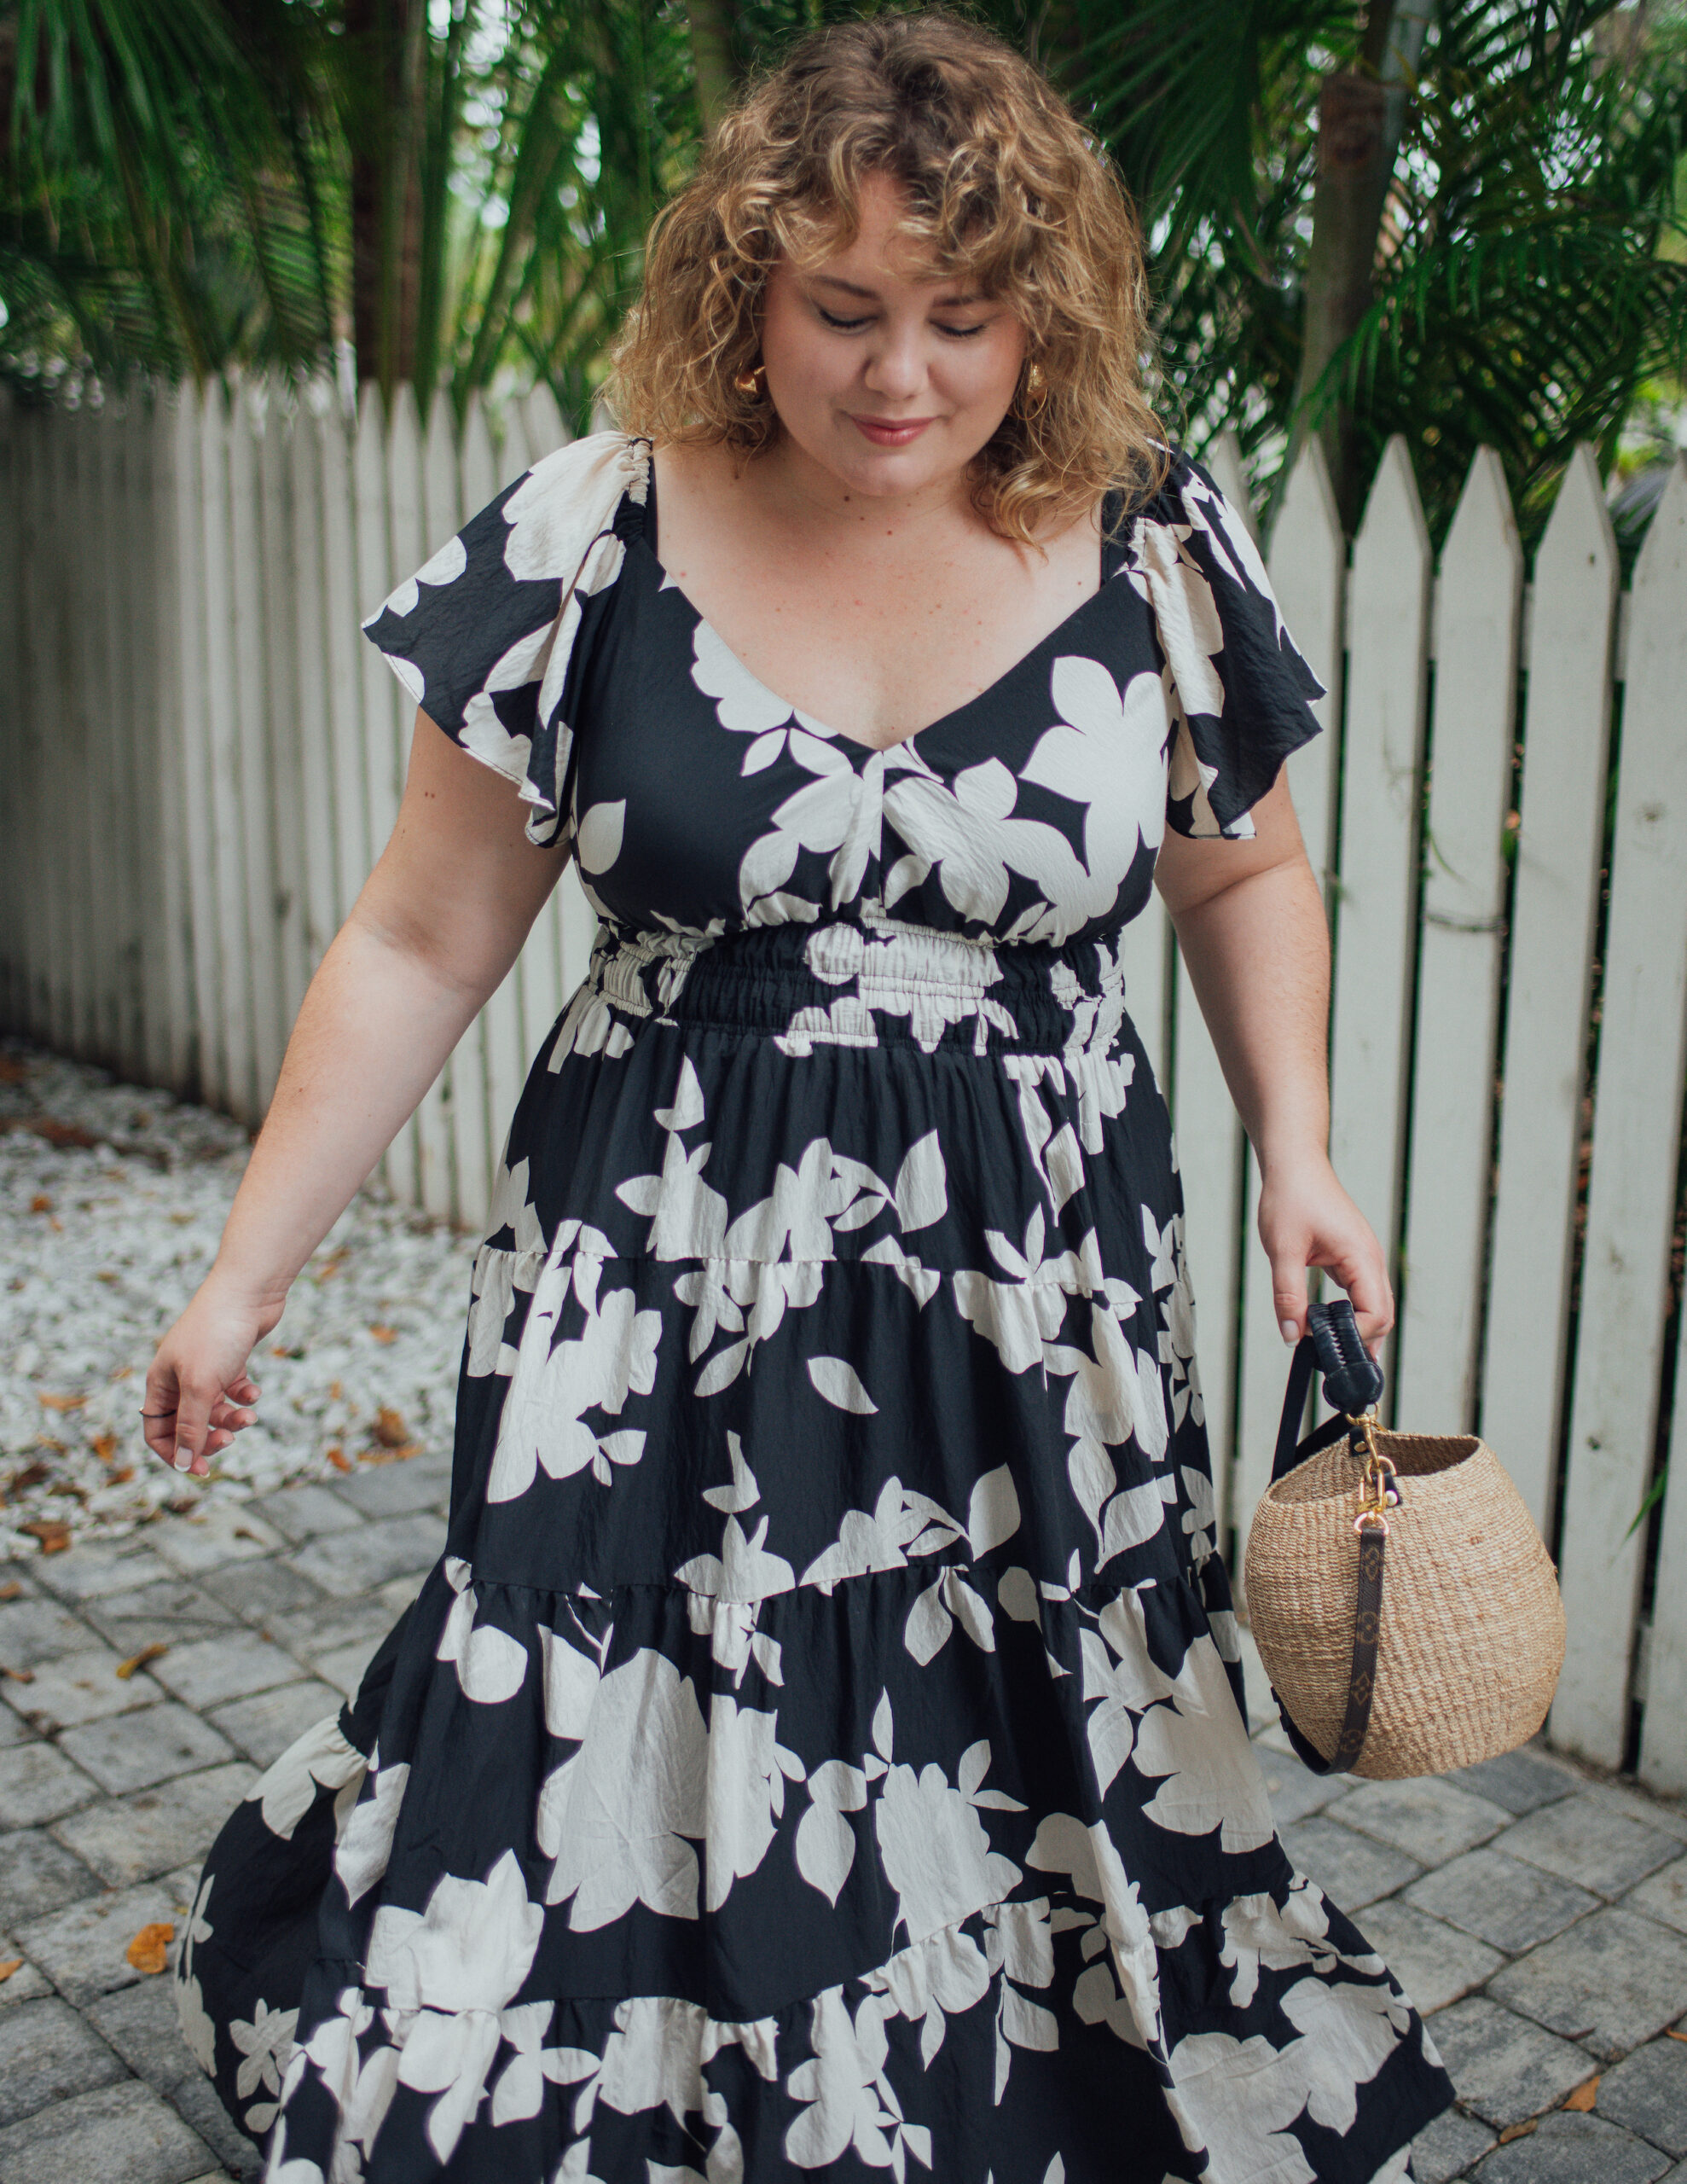 Sharing a round up of 10 spring and summer must have dresses. As the weather warms up its time to enjoy a beautiful dress! 